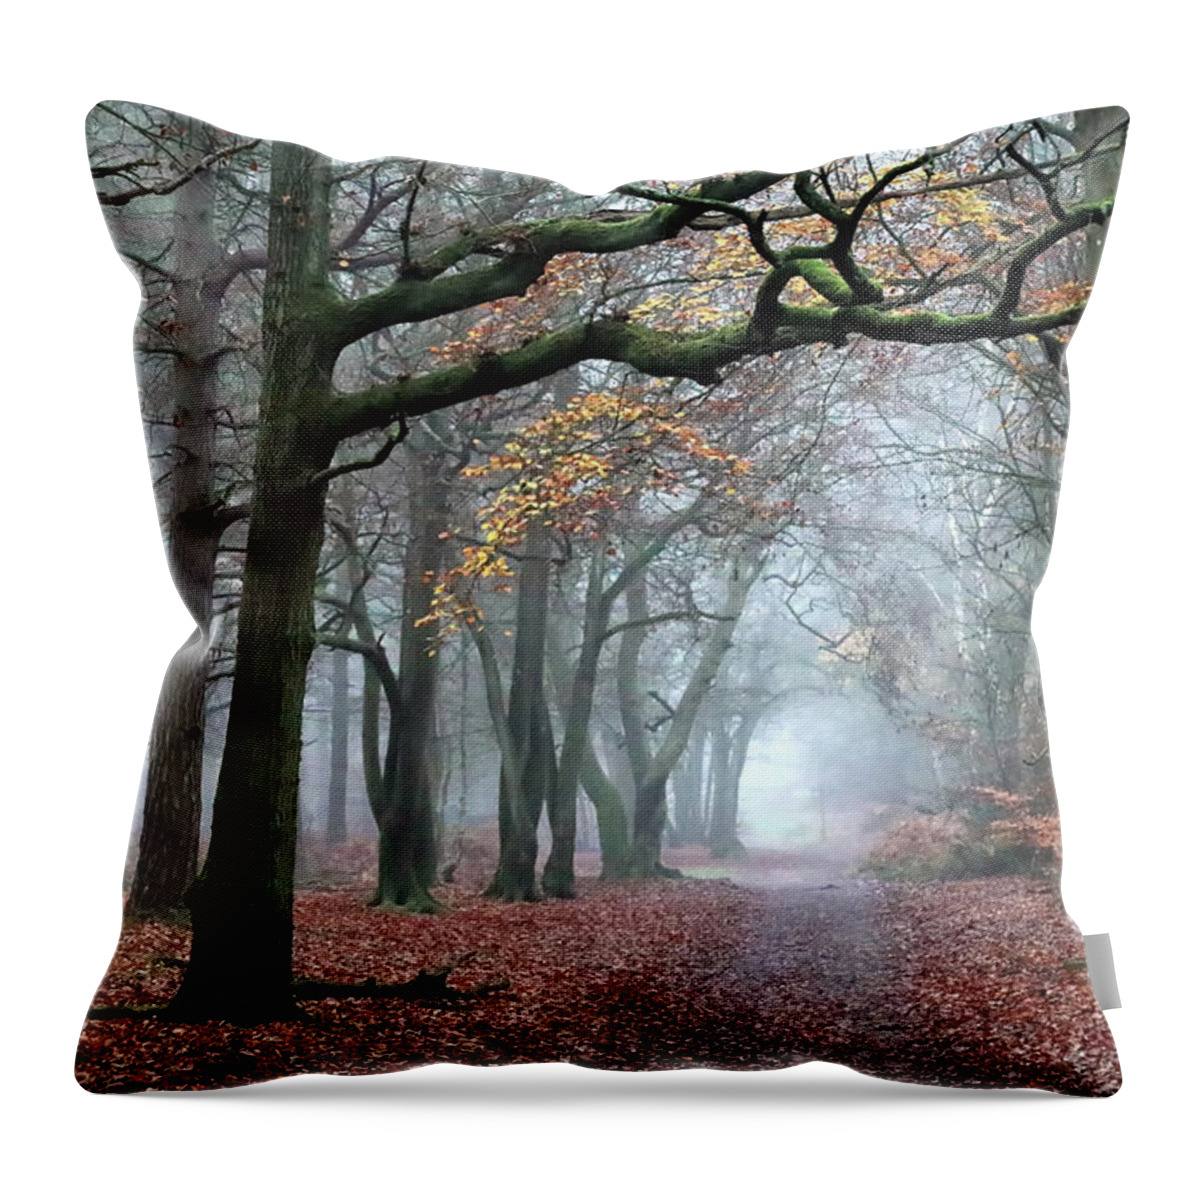 Landscape Throw Pillow featuring the photograph Misty Woods by Shirley Mitchell